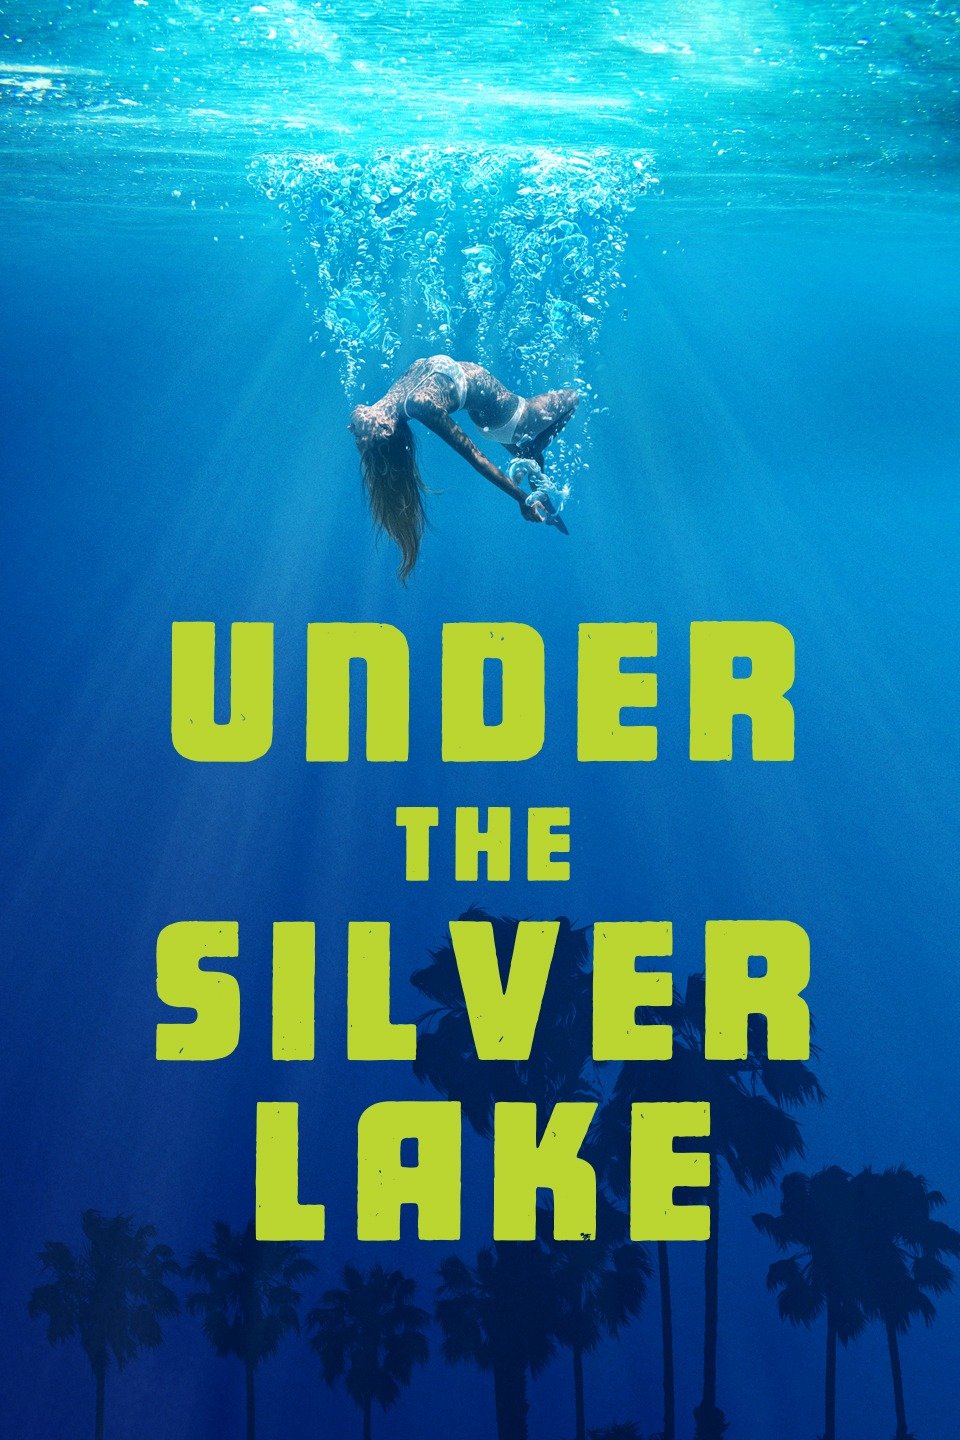 Under the Silver Lake (2019)